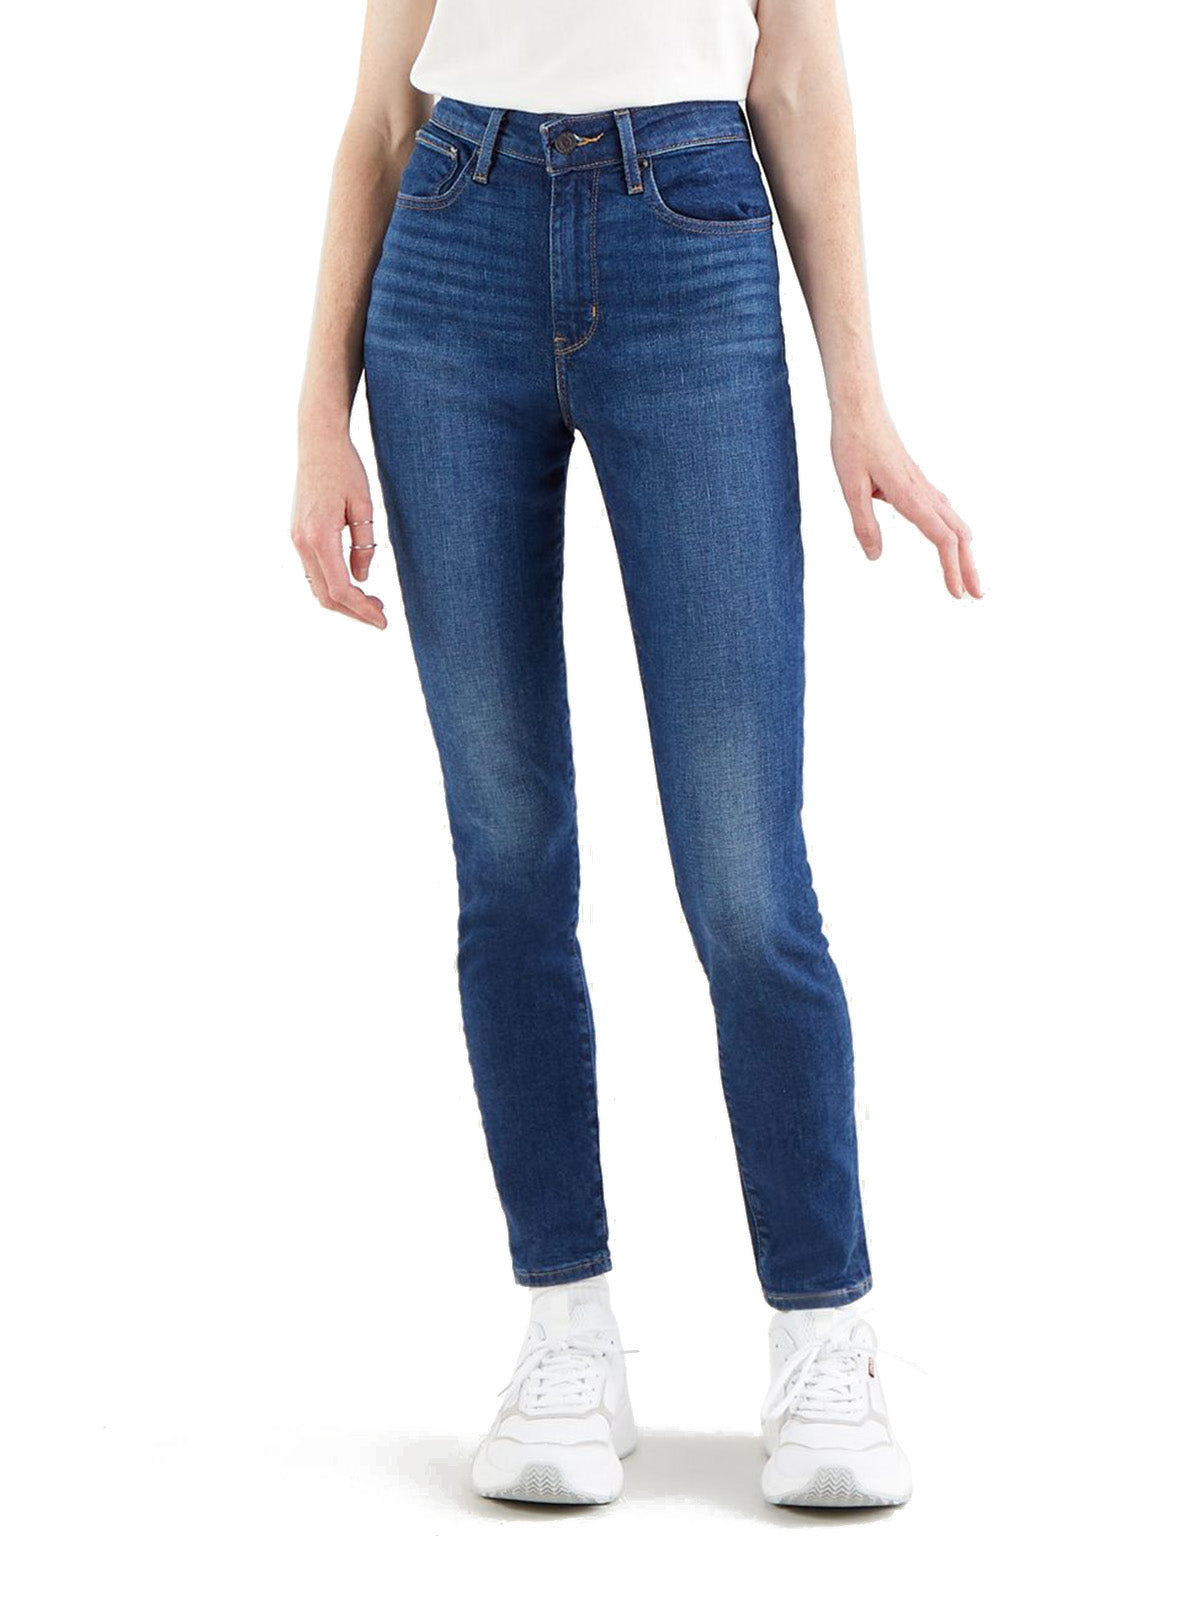 Jeans Donna Levi's - 721 High Rise Skinny Jeans - Blu